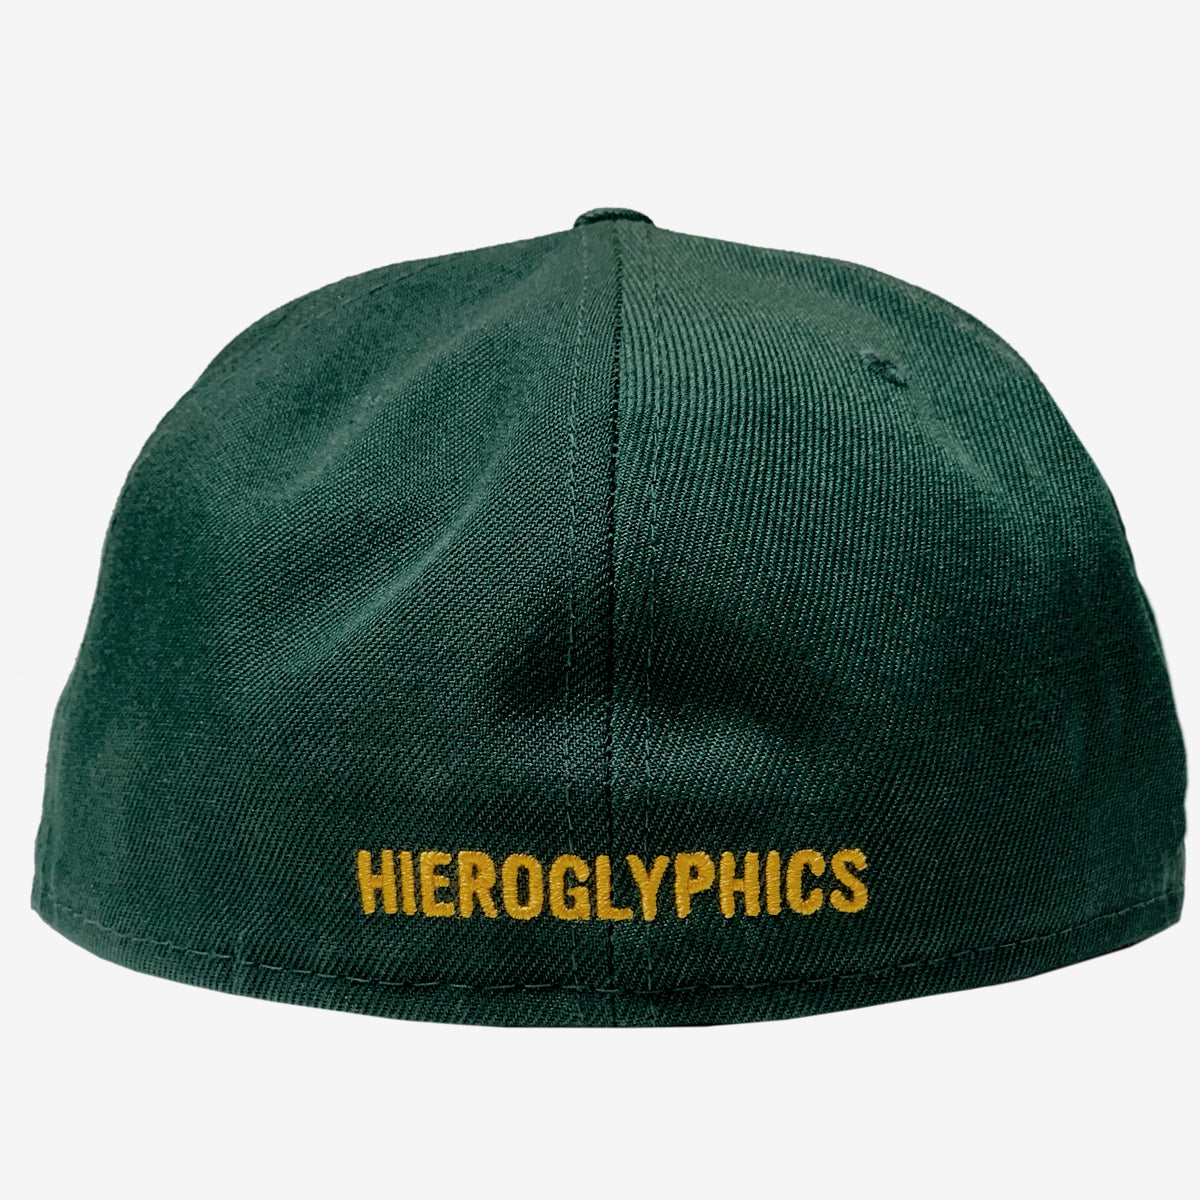 The backside of a green fitted cap with a gold embroidered HIEROGLYPHICS wordmark.